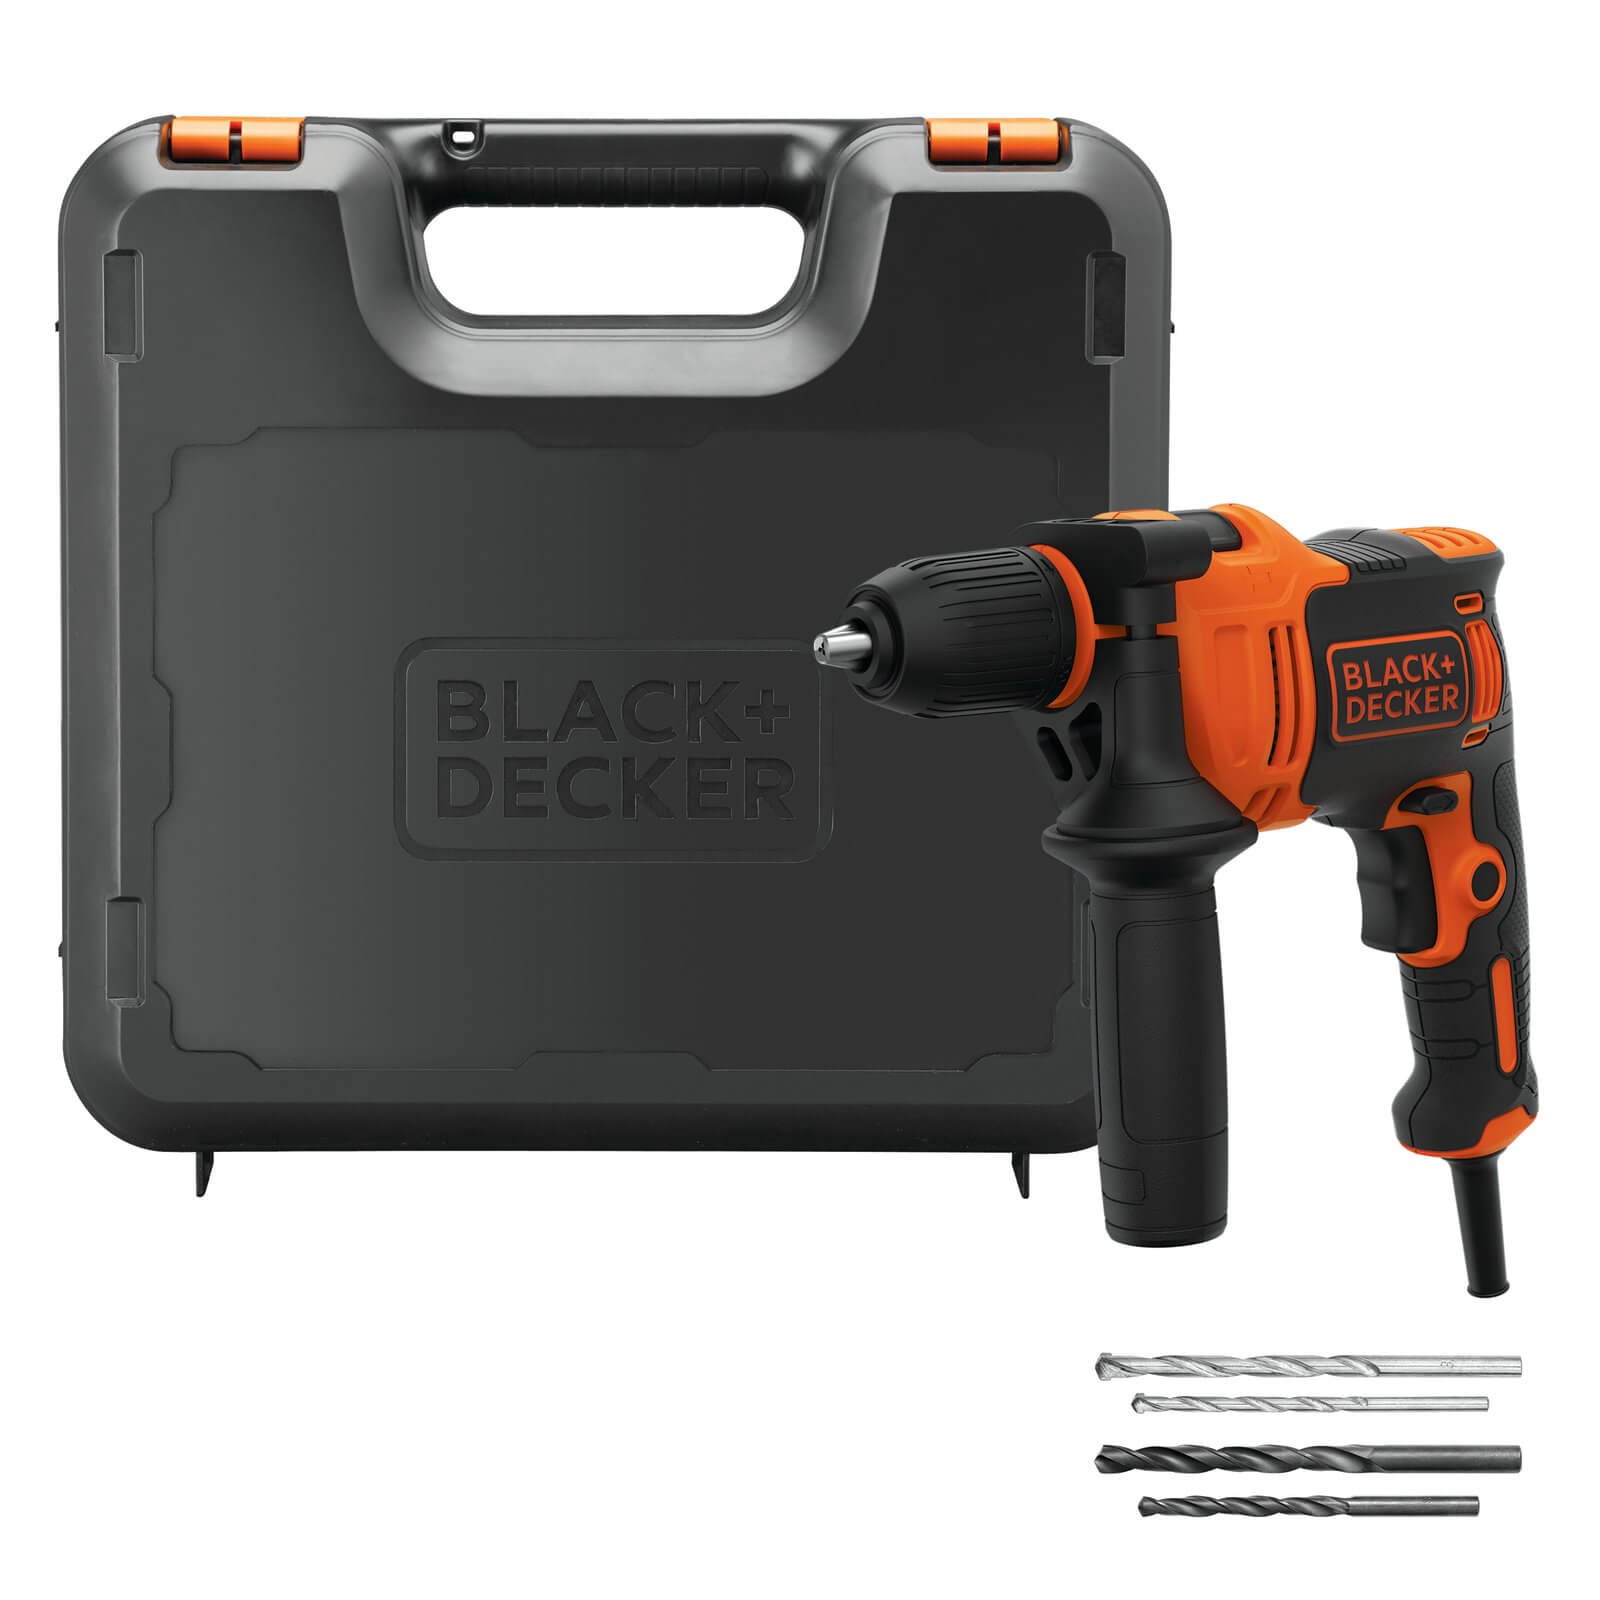 Photo of Black+decker 13mm 710w Corded Hammer Drill With Drill Bit Accessories And Kit Box -beh710k-gb-